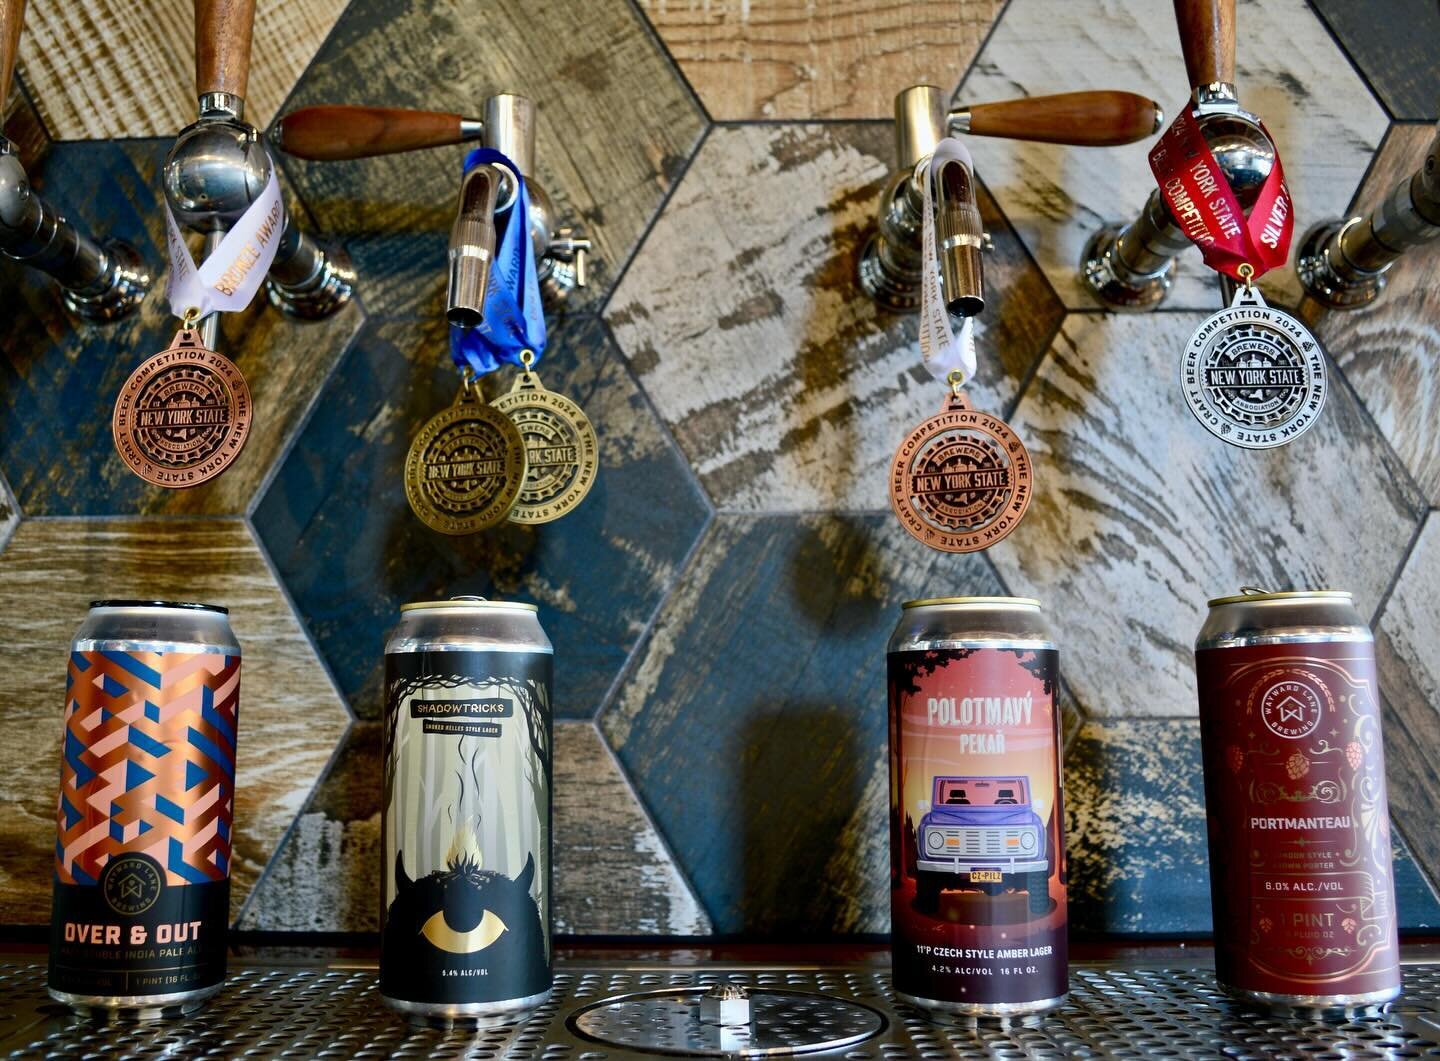 Last week we were proud to come home with some hefty hardware from the New York State Craft Beer Competition! 4 medals were awarded to our humble little operation, accumulating some of the highest points of the several hundred breweries who participa